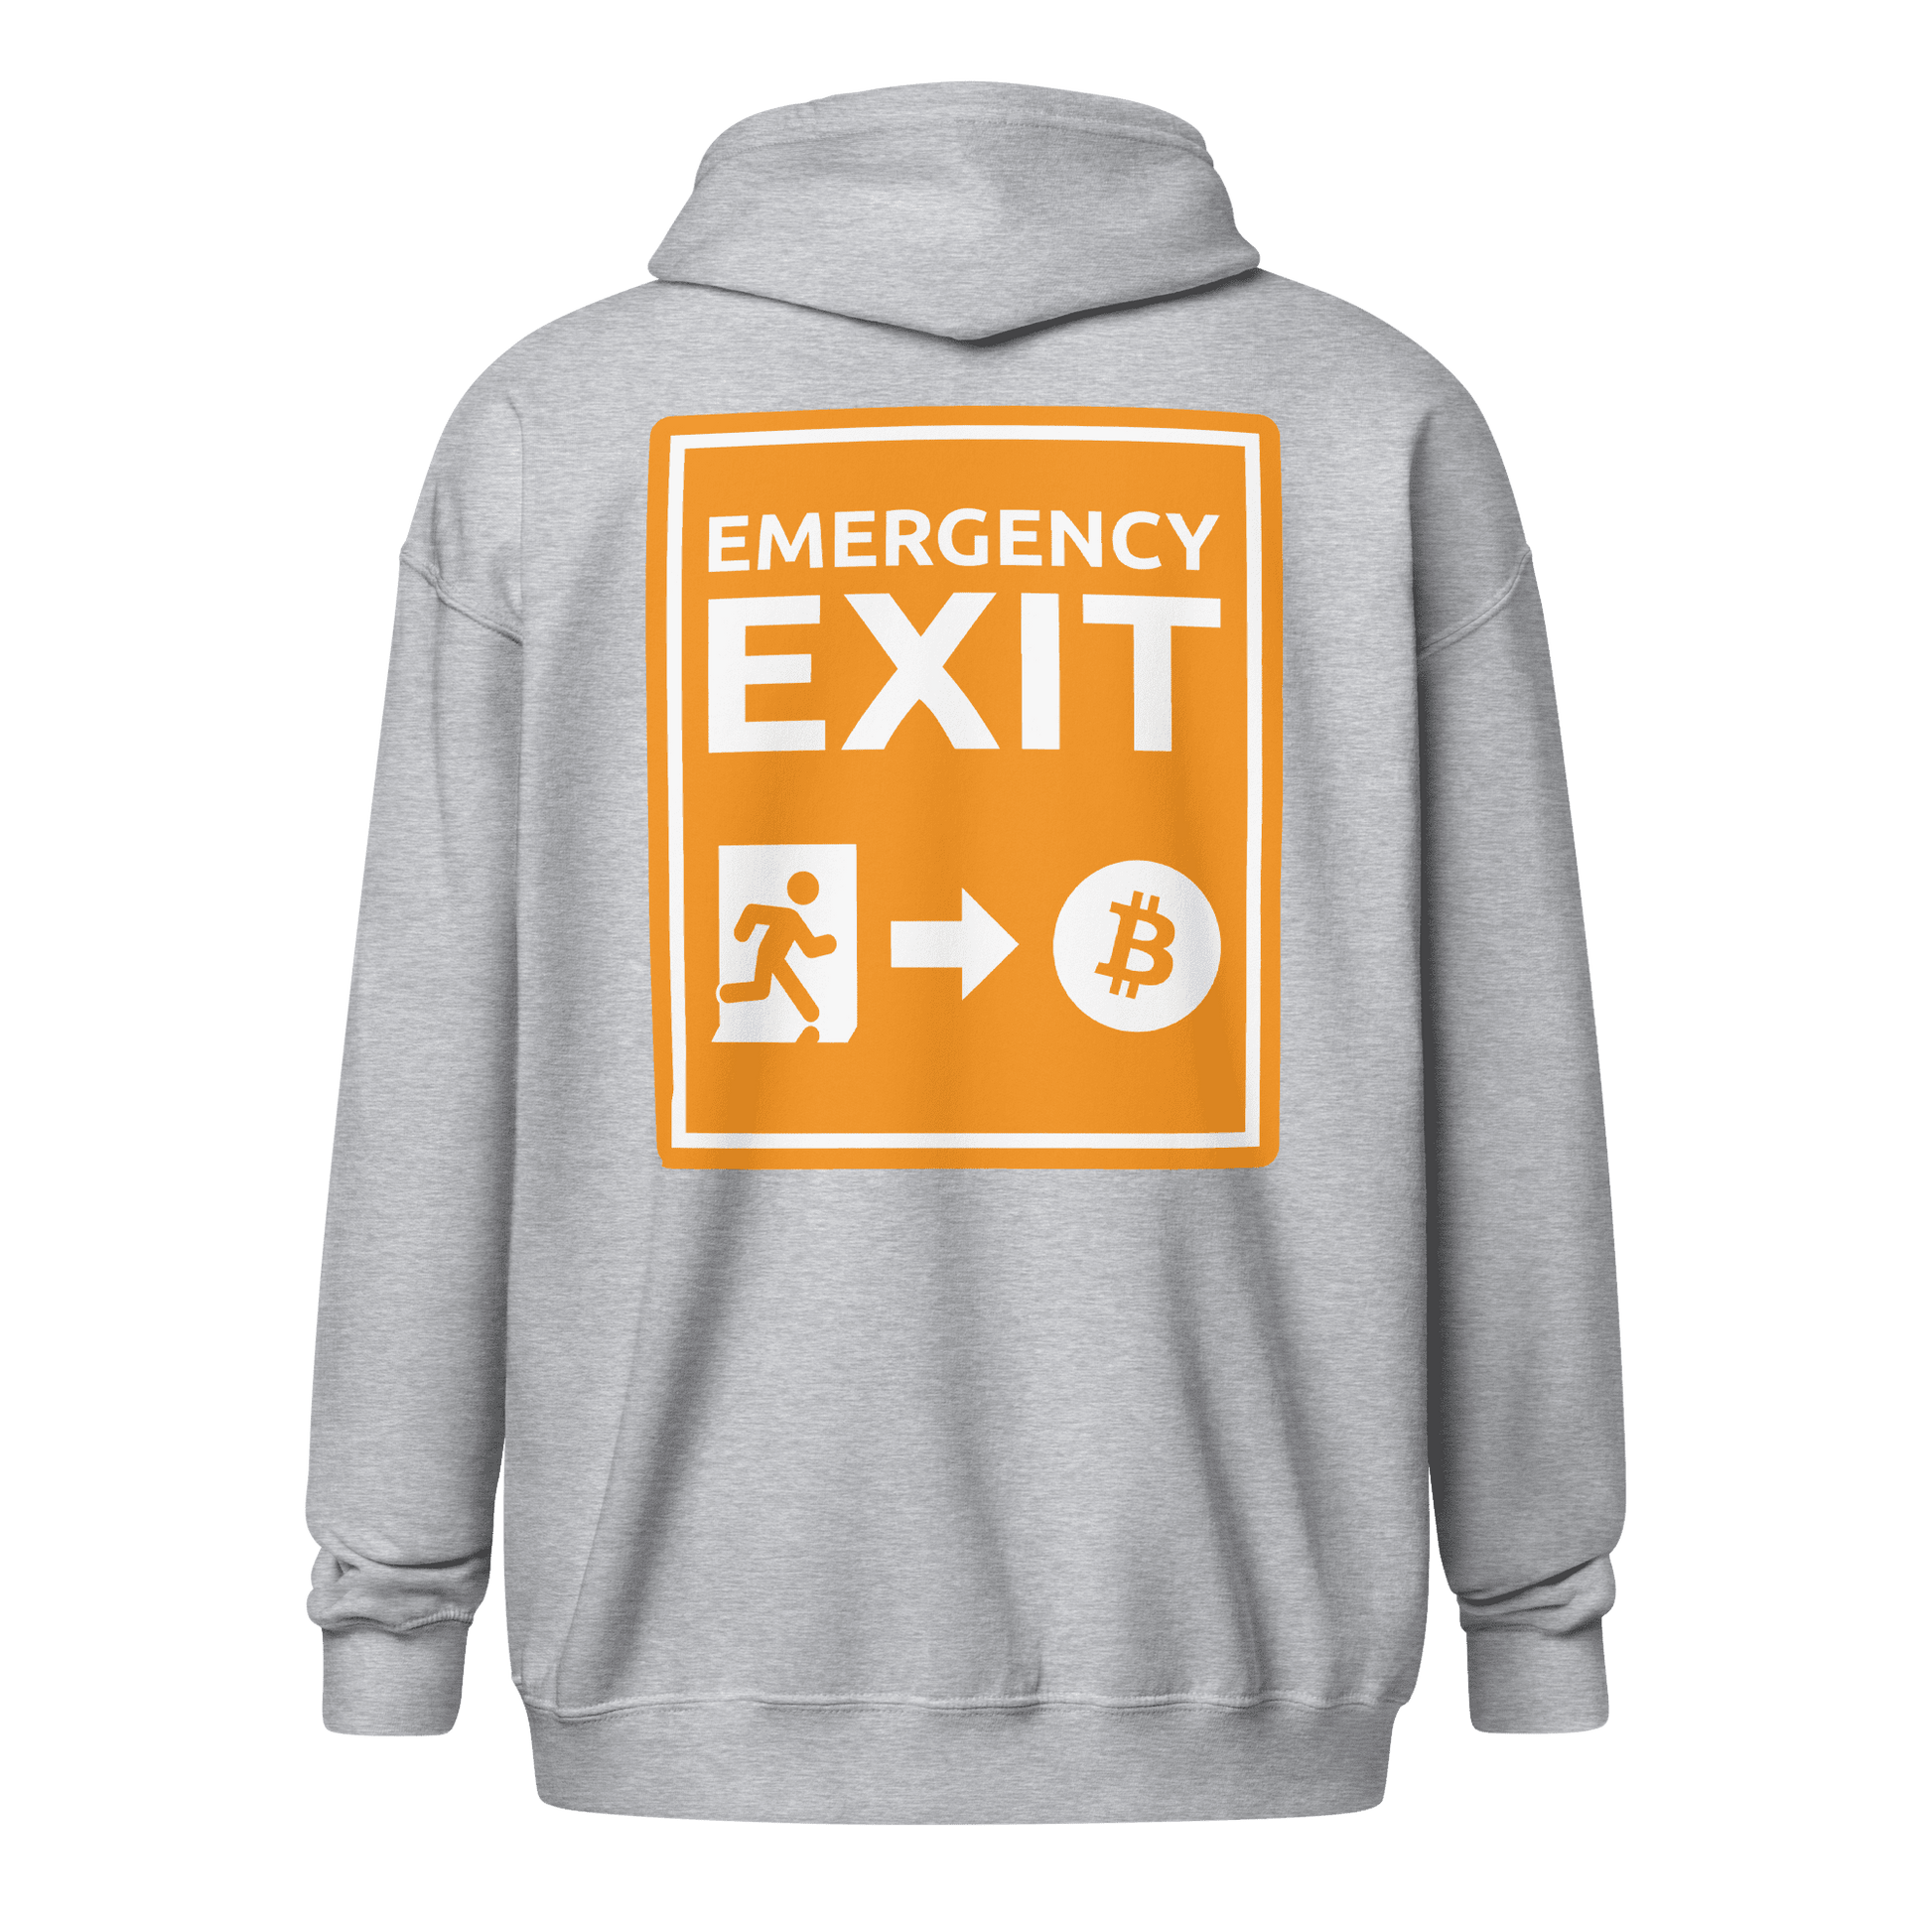 Back view of a sports grey bitcoin zip hoodie.